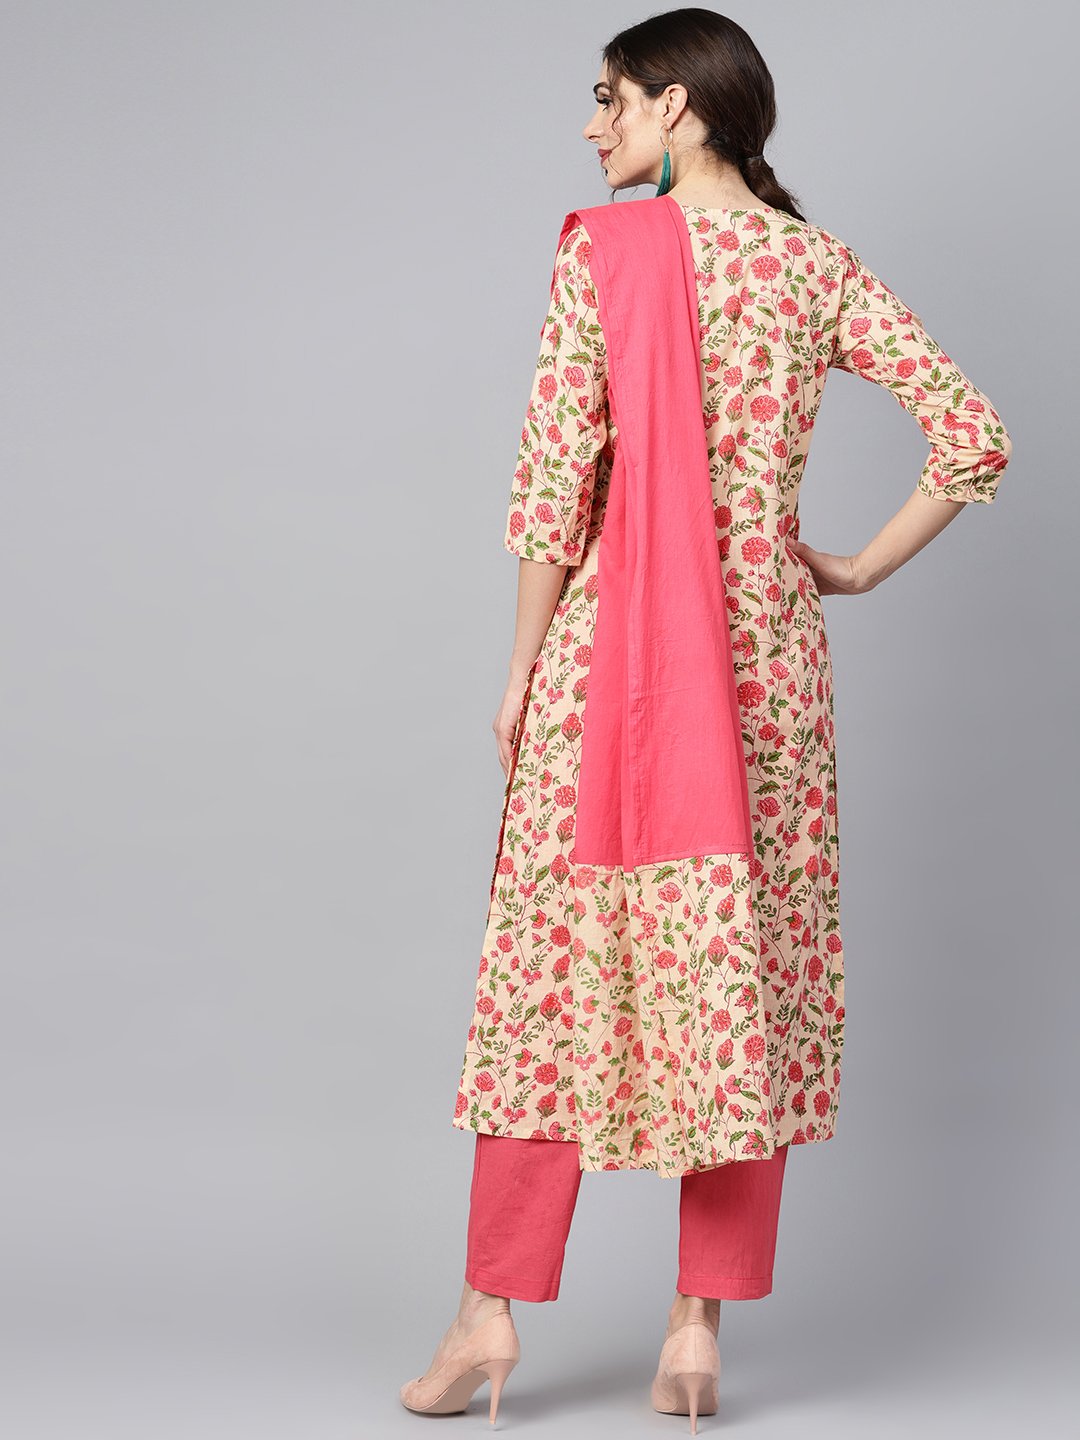 Women's Beige Colored Floral Printed Straight Kurta With Solid Pink Pants & Mul Dupatta - Nayo Clothing